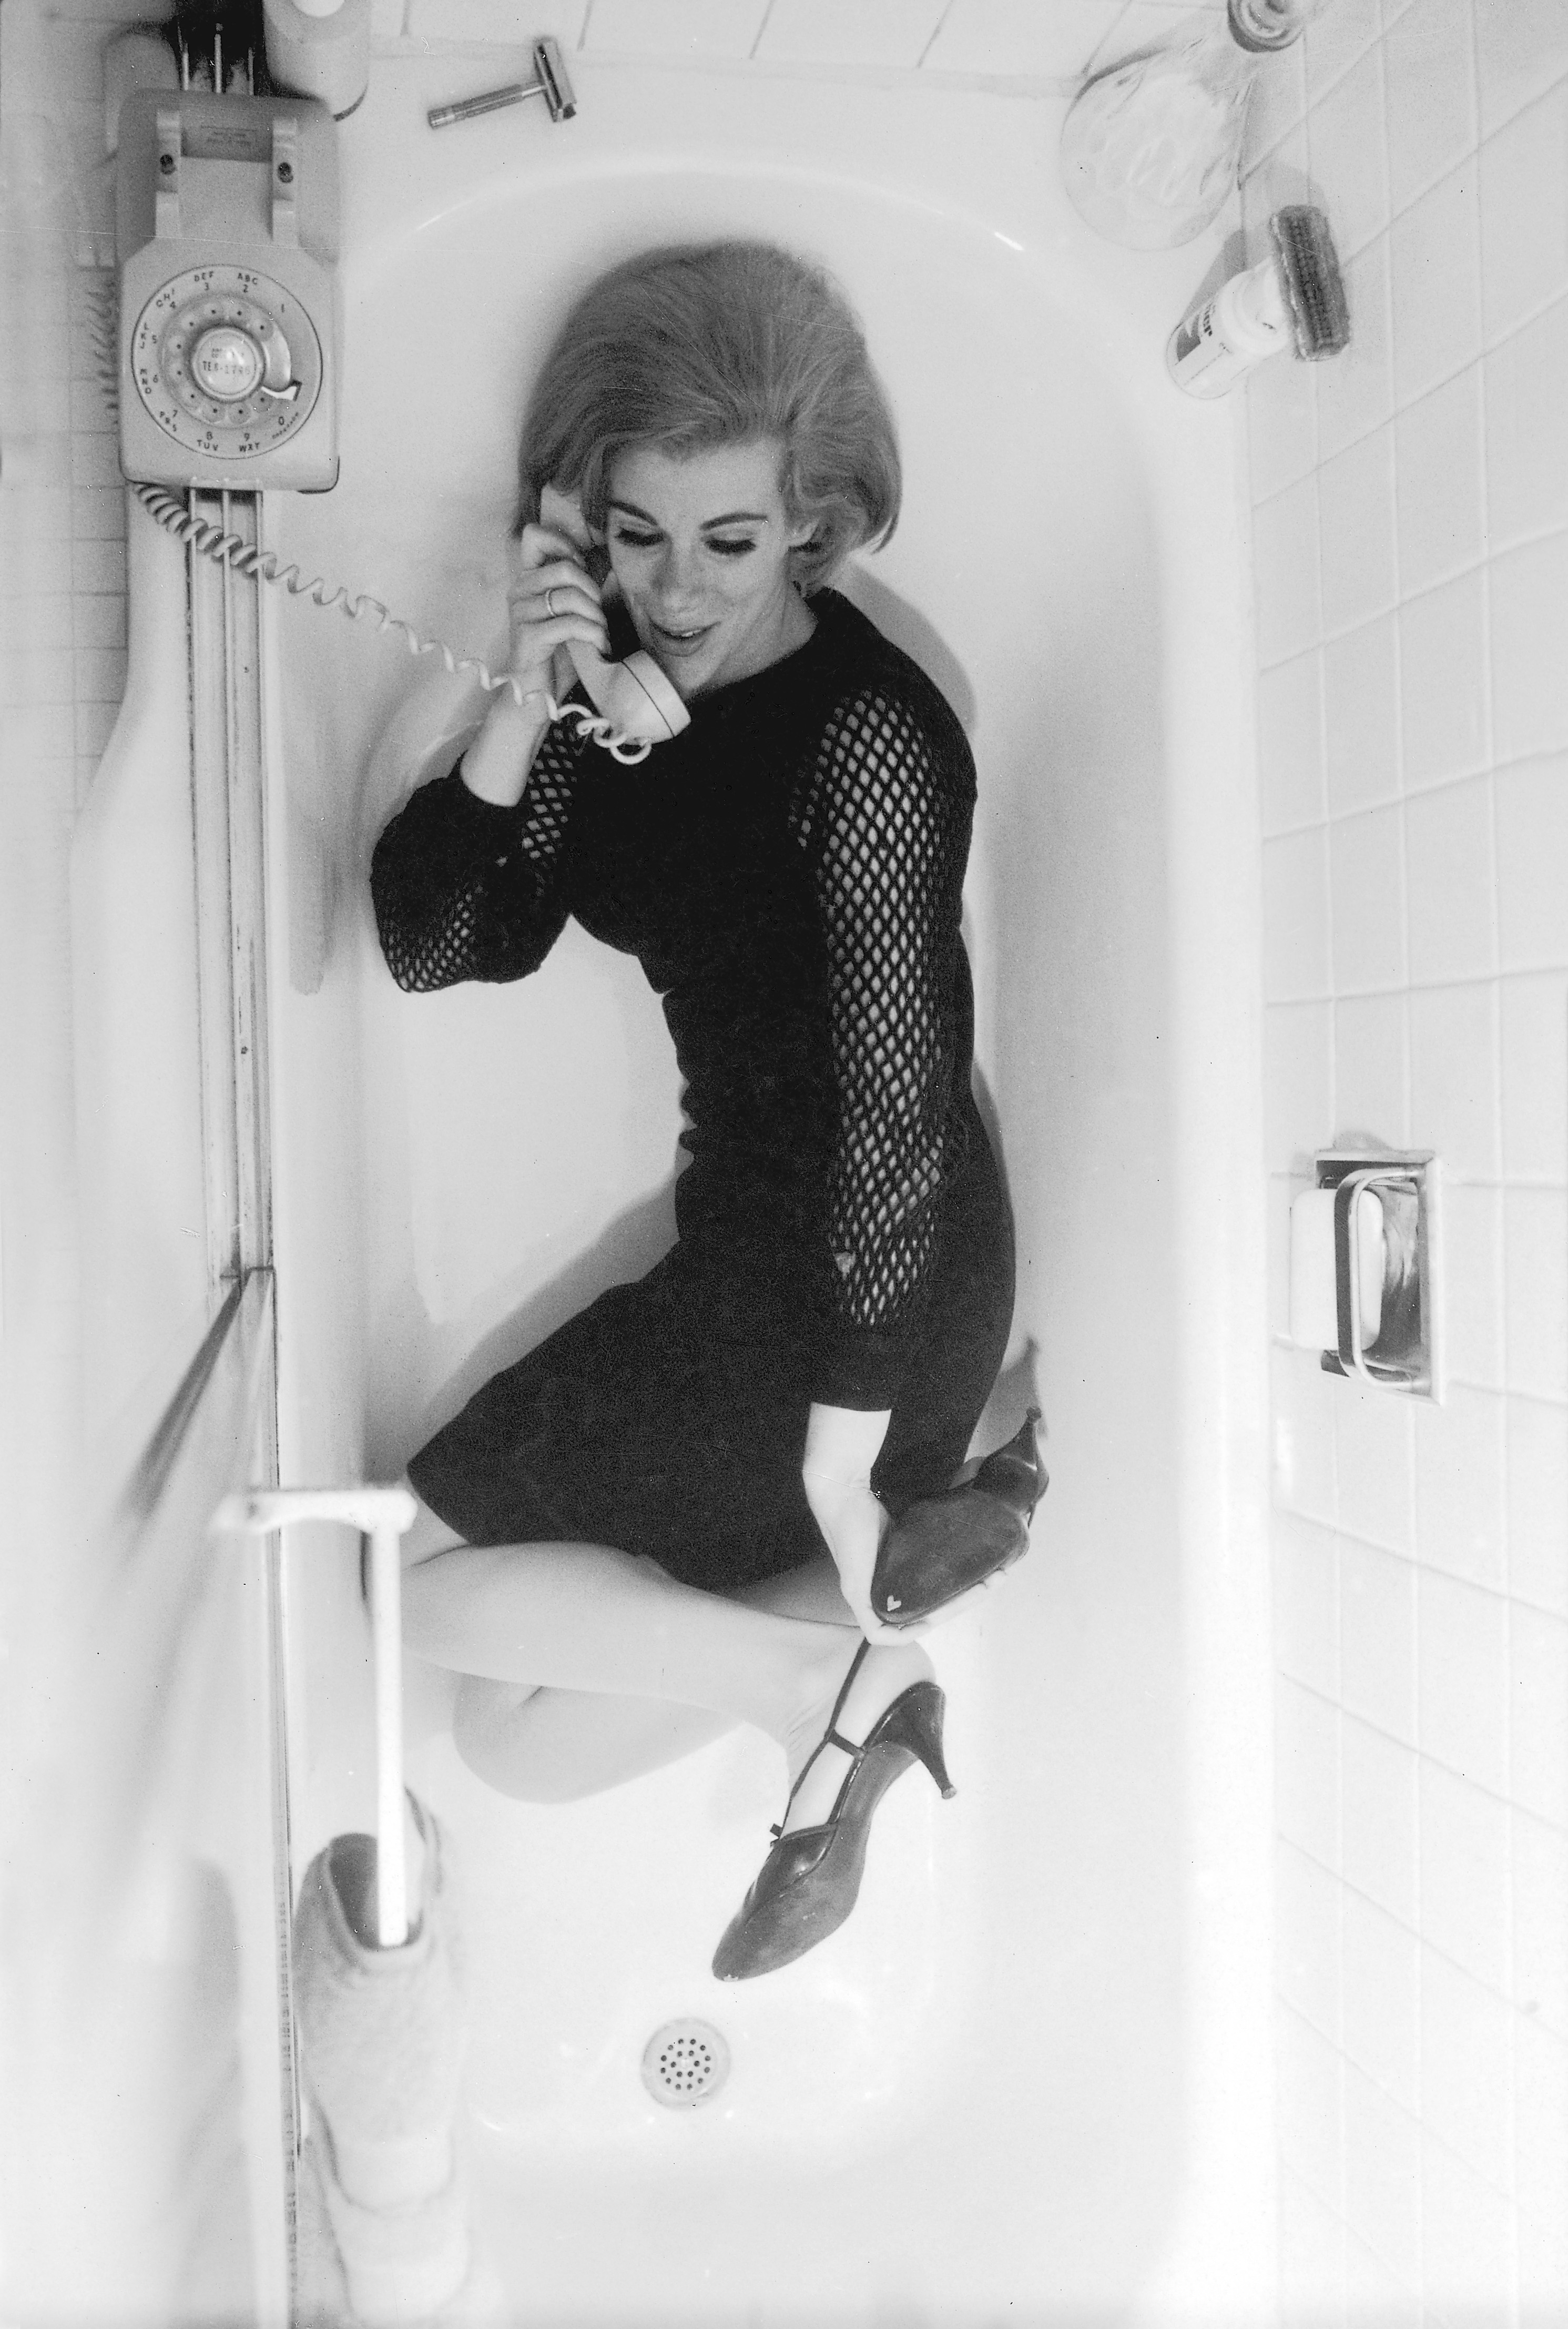 Comedienne Joan Rivers wearing black mesh dress and heels, while talking on the phone in a bathtub in New York City on March 1, 1966. (Truman Moore—The TIME &amp; LIFE Picture Collection/Getty Images)